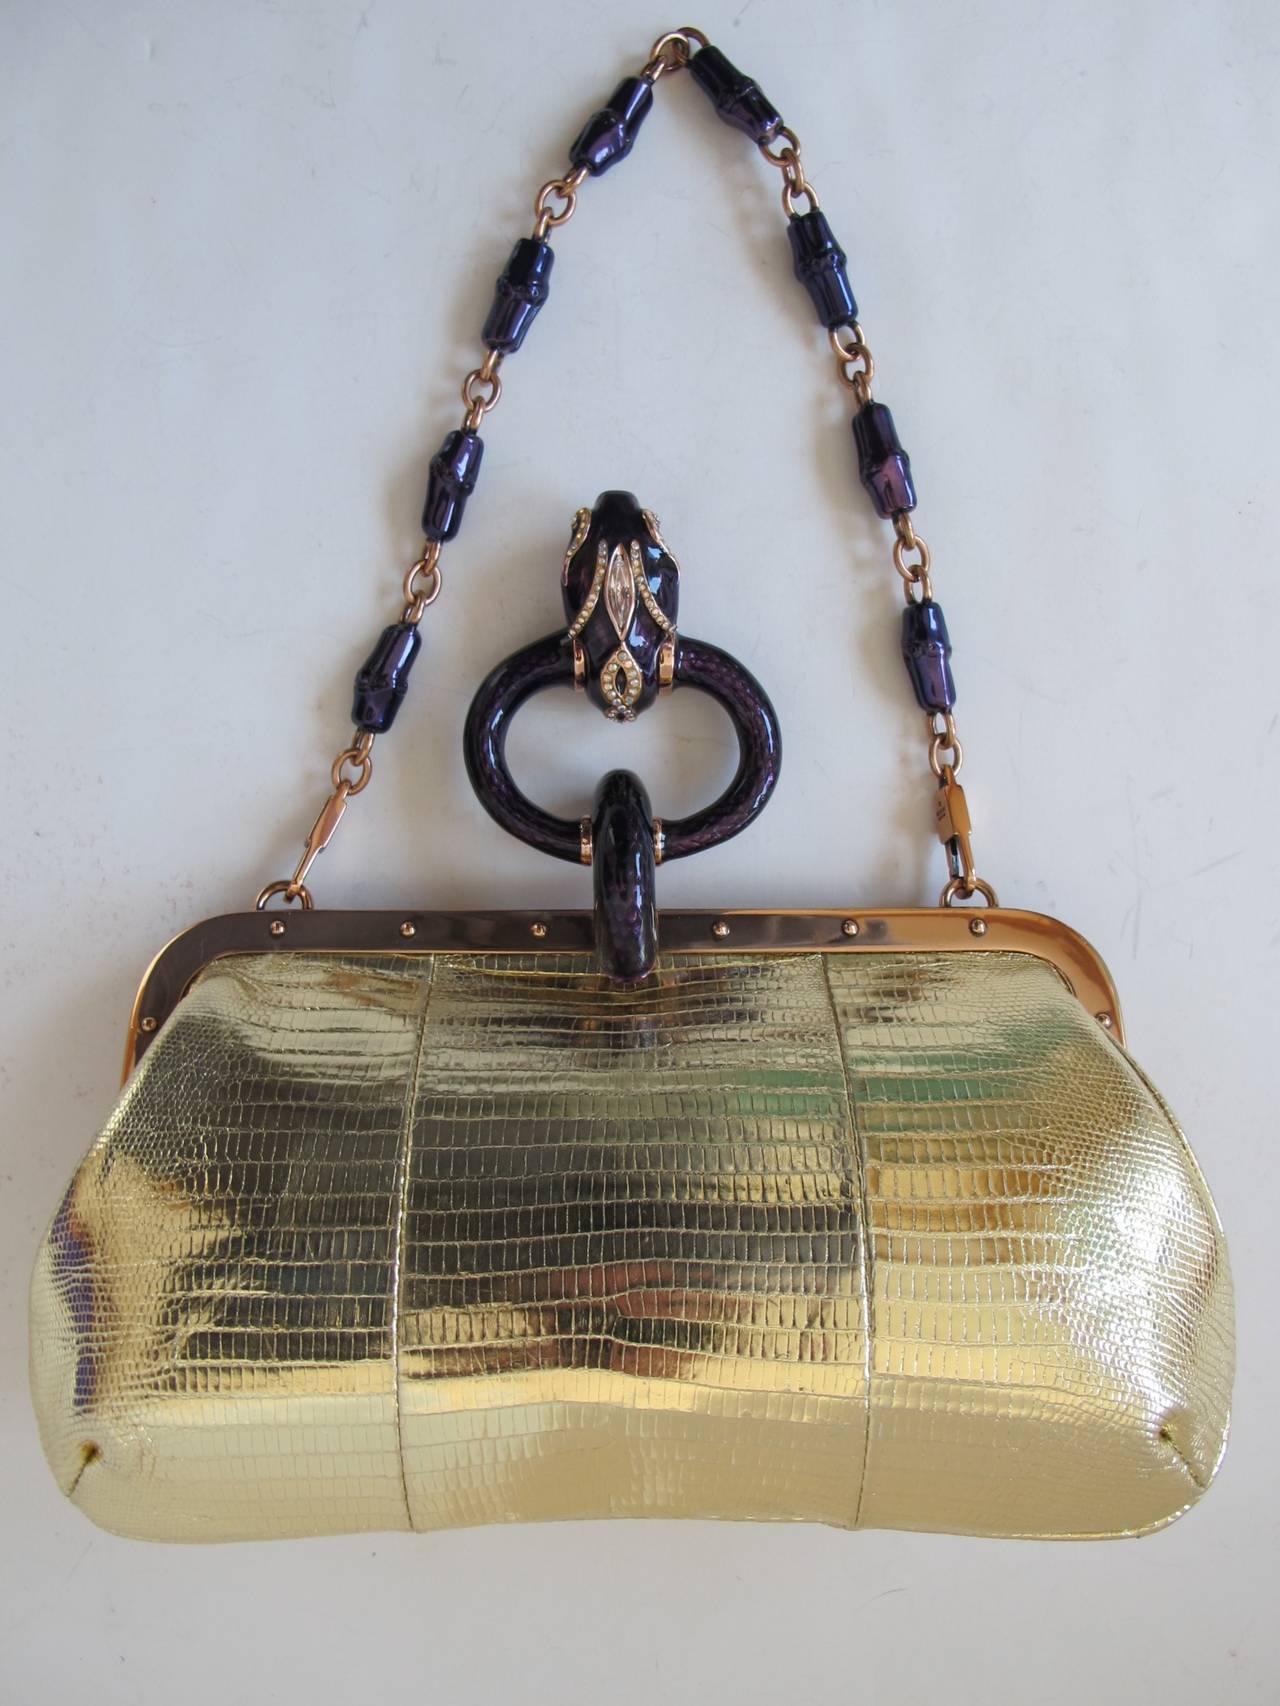 Tom Ford designed for Gucci this gold faux lizard leather purse. It has a purple cloisonné enamel clasp featuring a snake's head. The snake has a diamante on it and its mouth is clutching a round swarovski crystal ball. The chain handle is